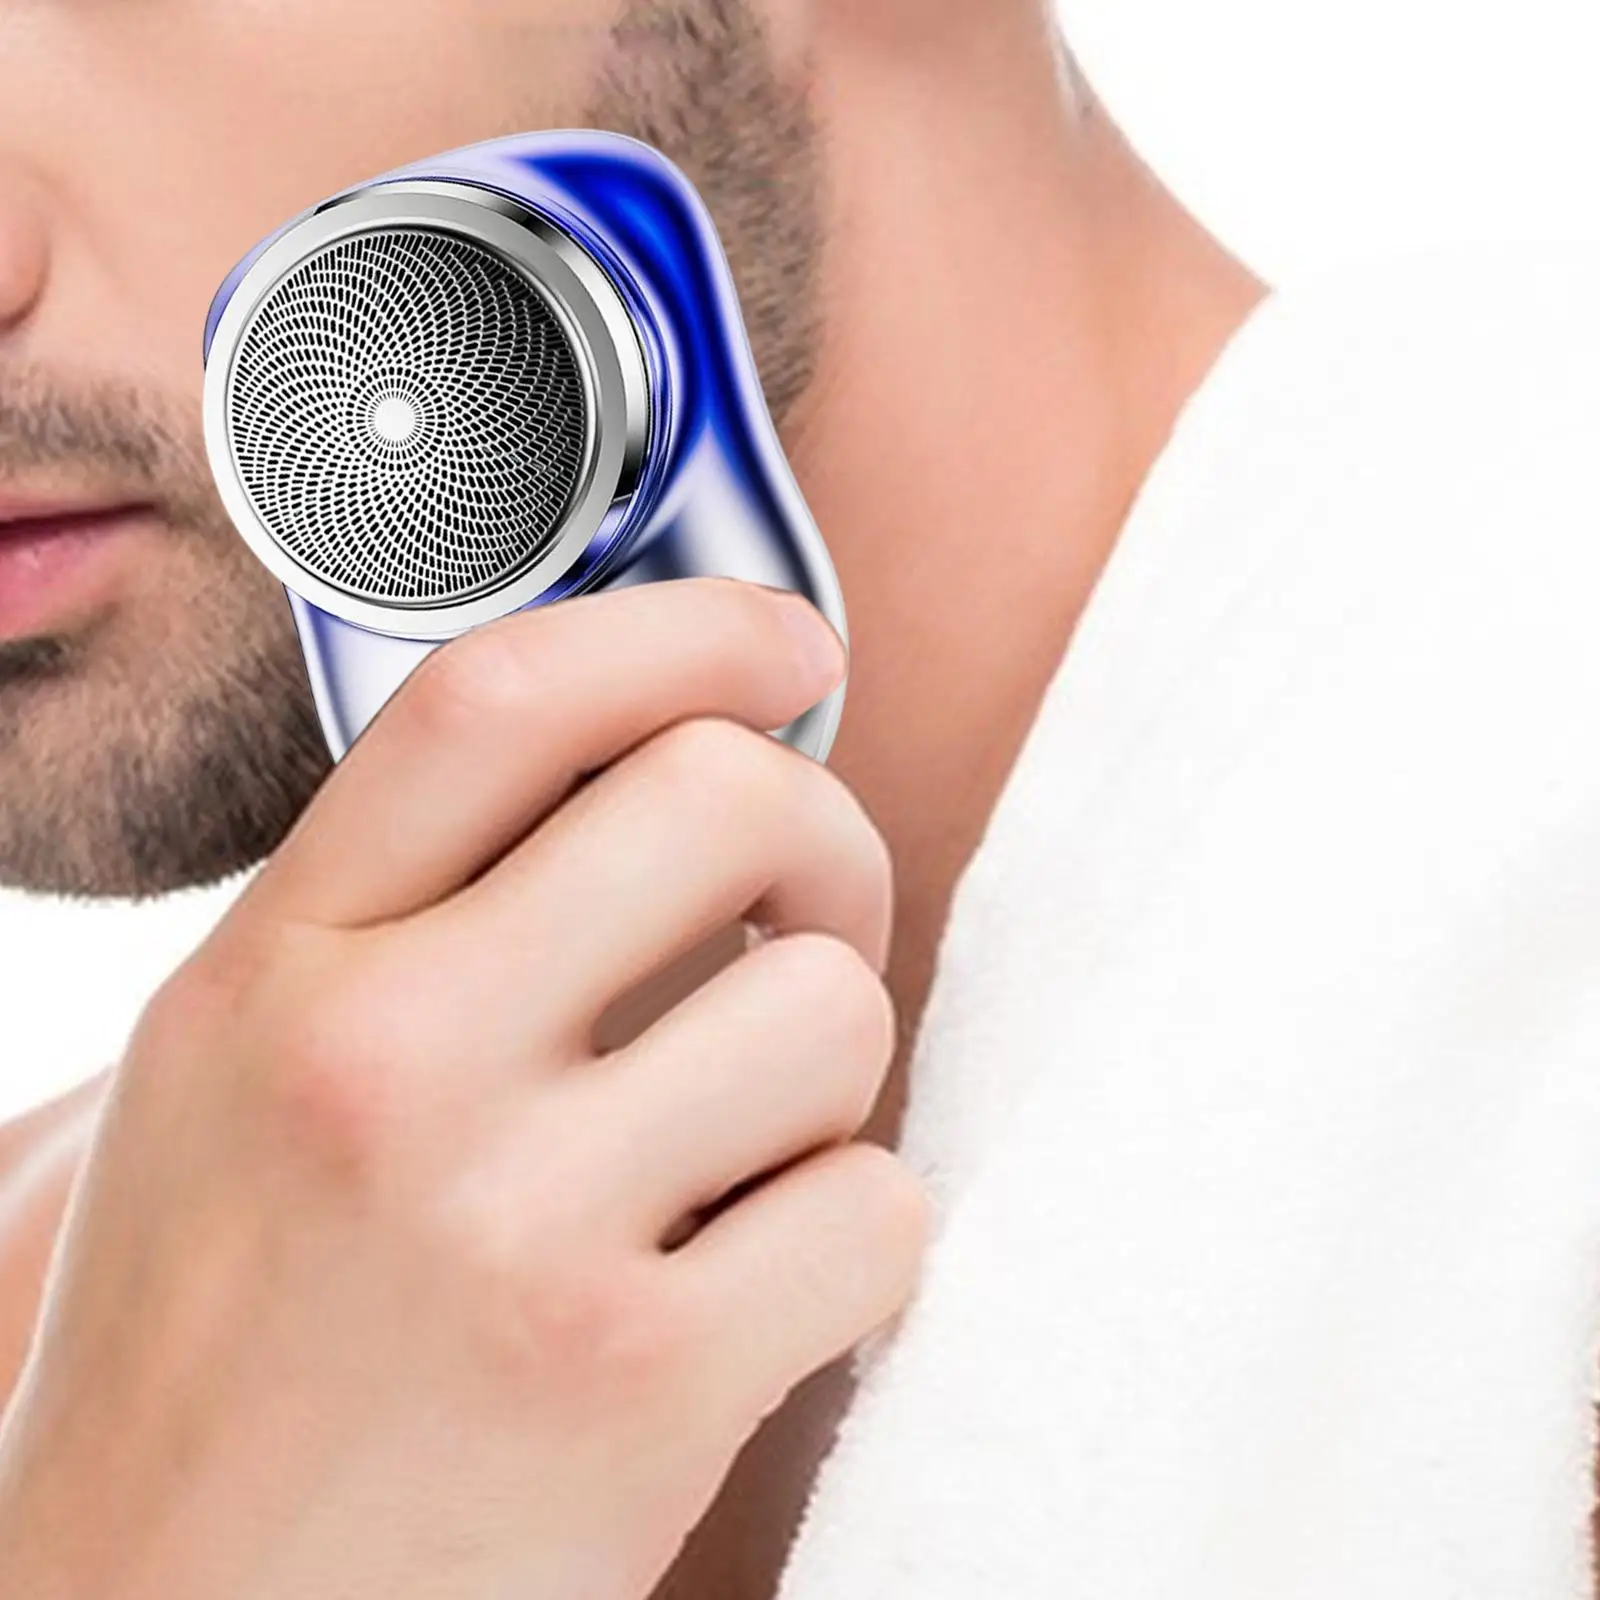 electric Shaver Precision Trimmer Razor Rechargeable Pocket Size for Arm